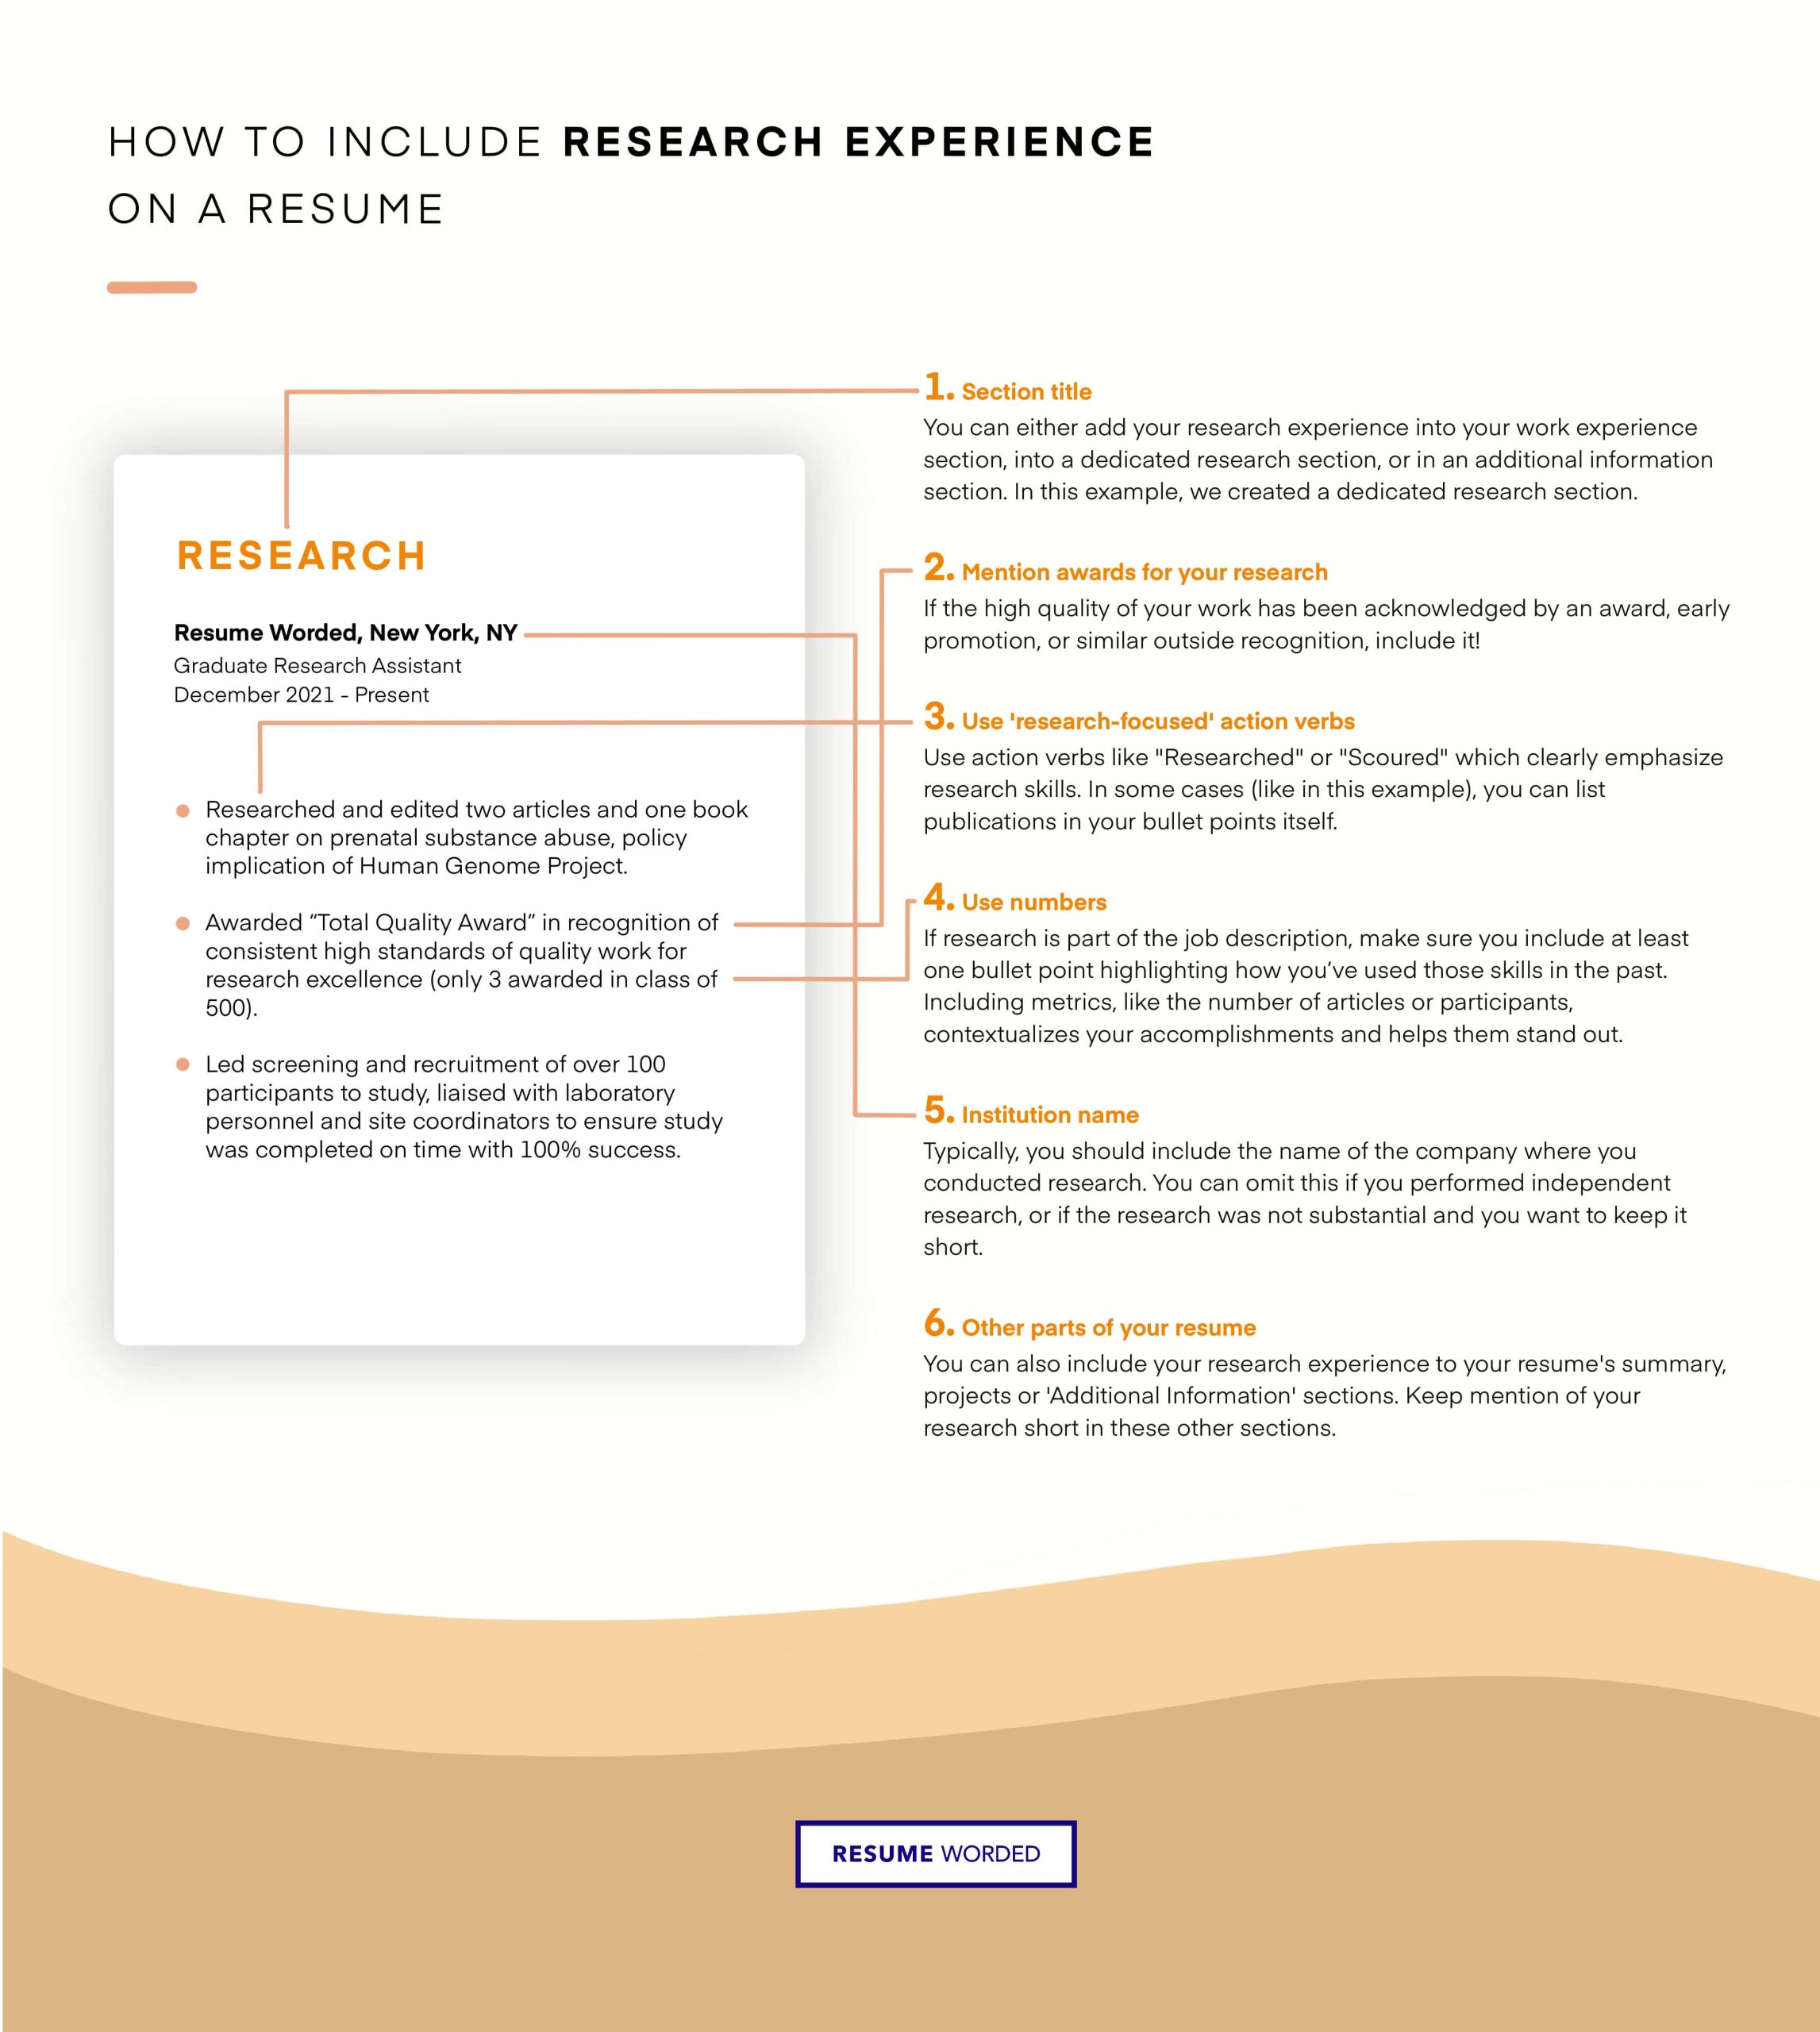 Sample Resume for Experience Research Scientist How to List Research Experience On Your Resume